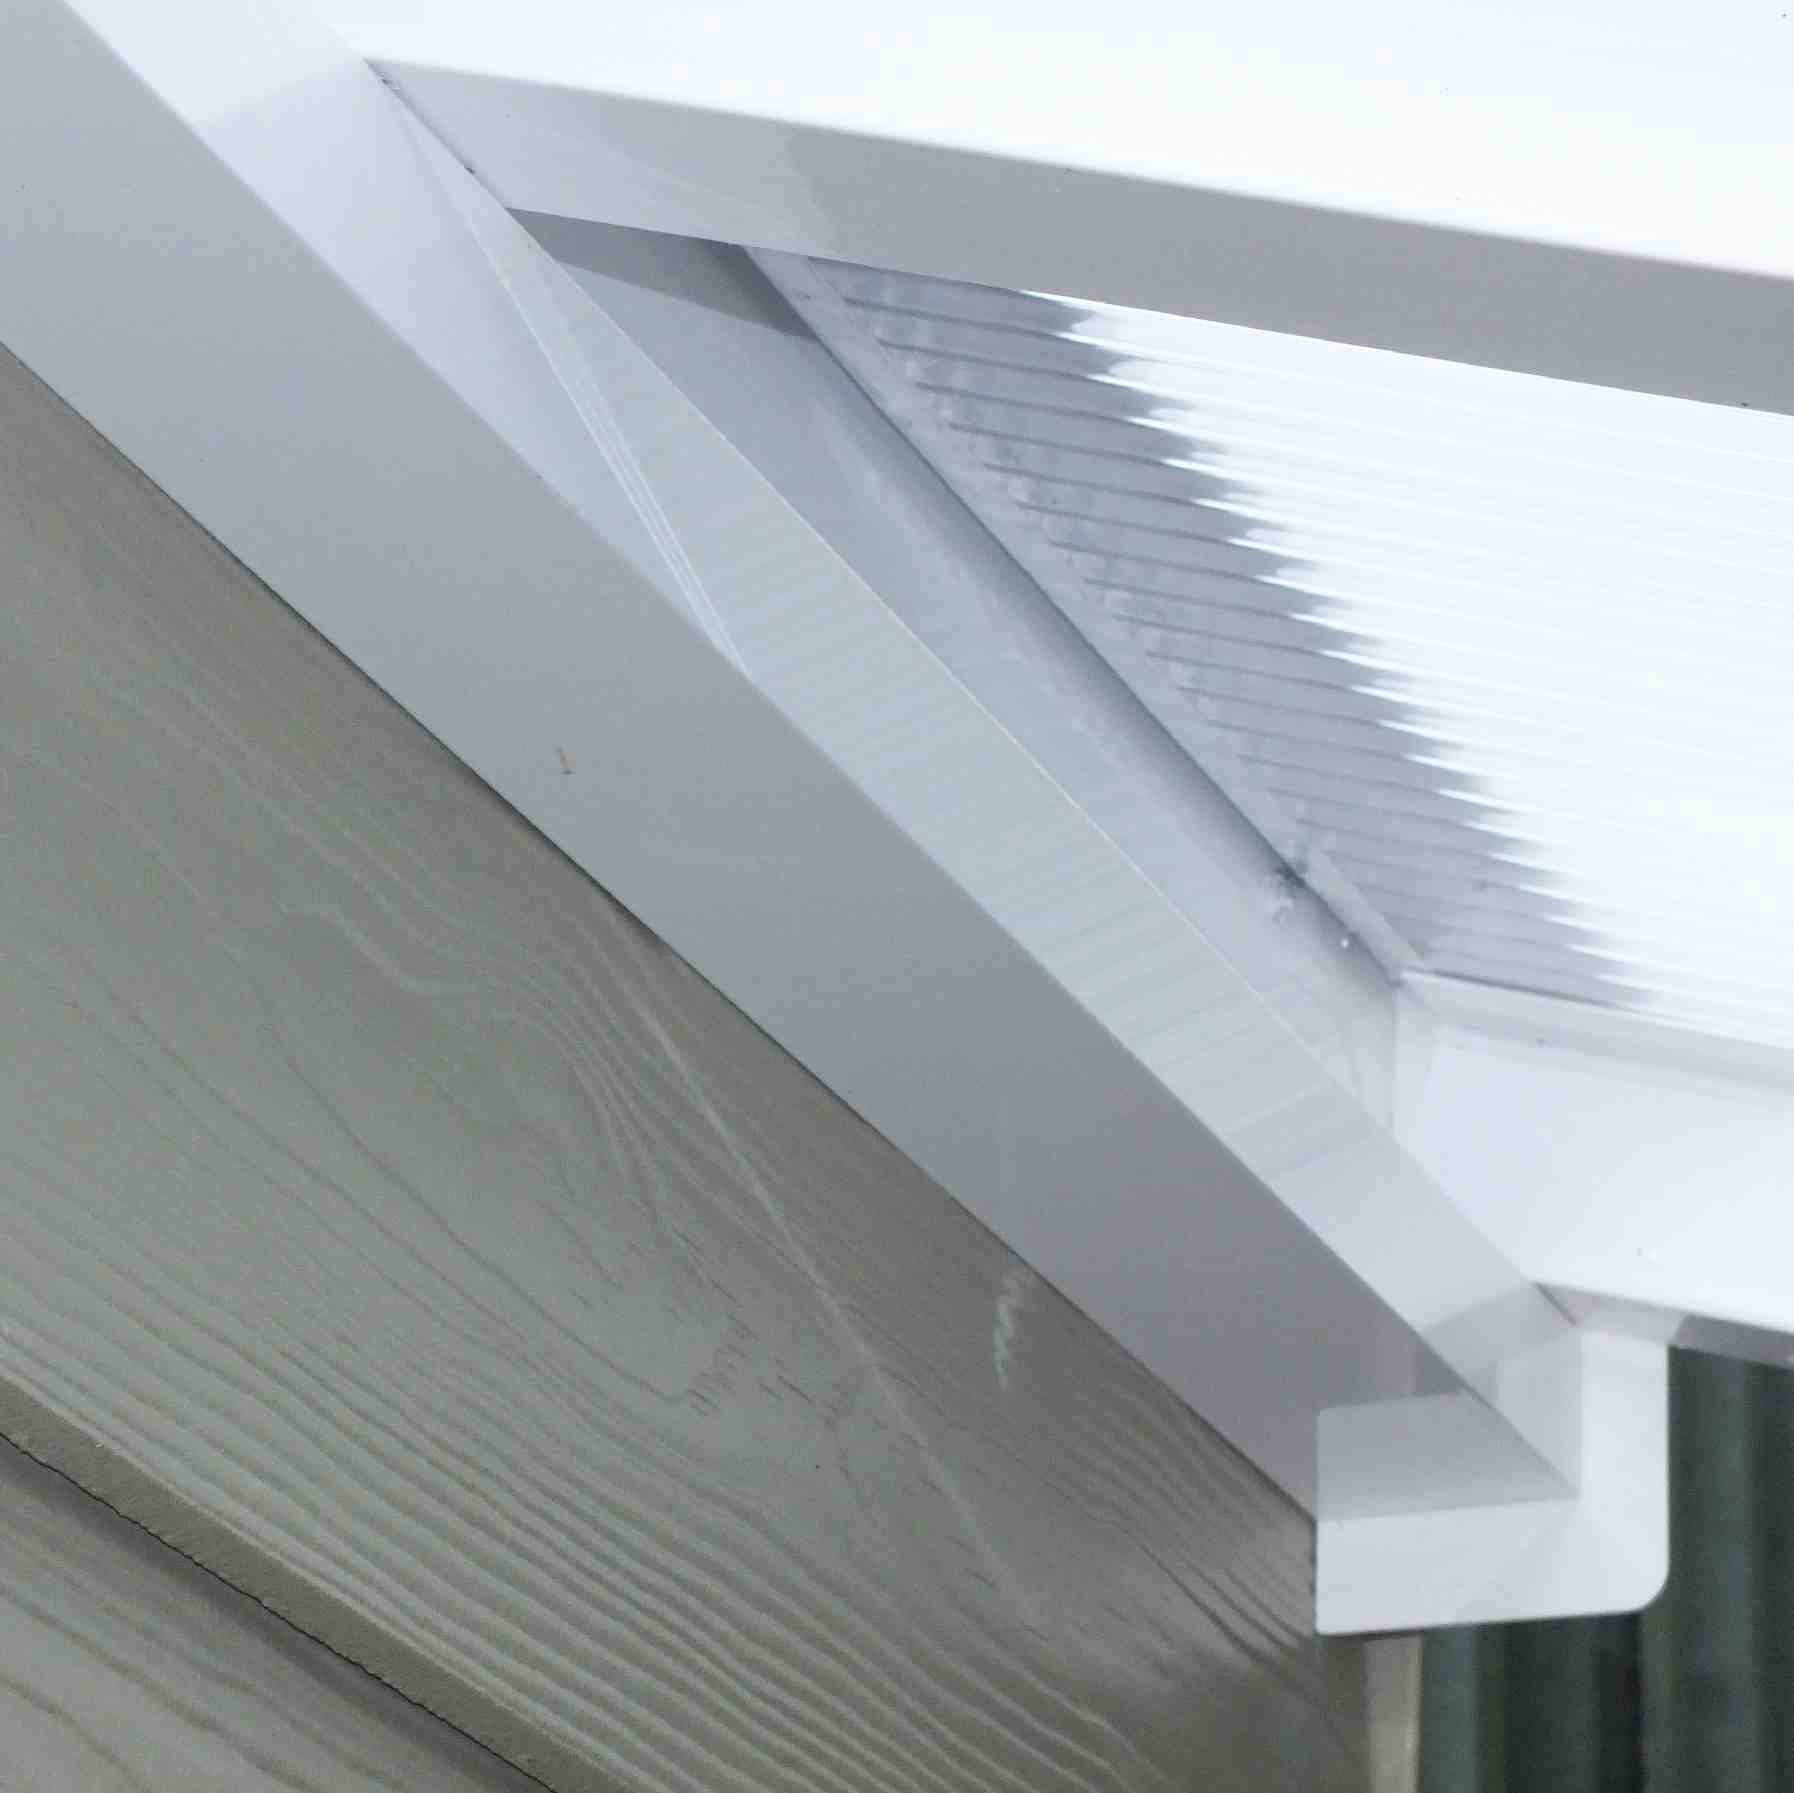 Great deals on Omega Verandah White with 16mm Polycarbonate Glazing - 8.4m (W) x 3.5m (P), (4) Supporting Posts